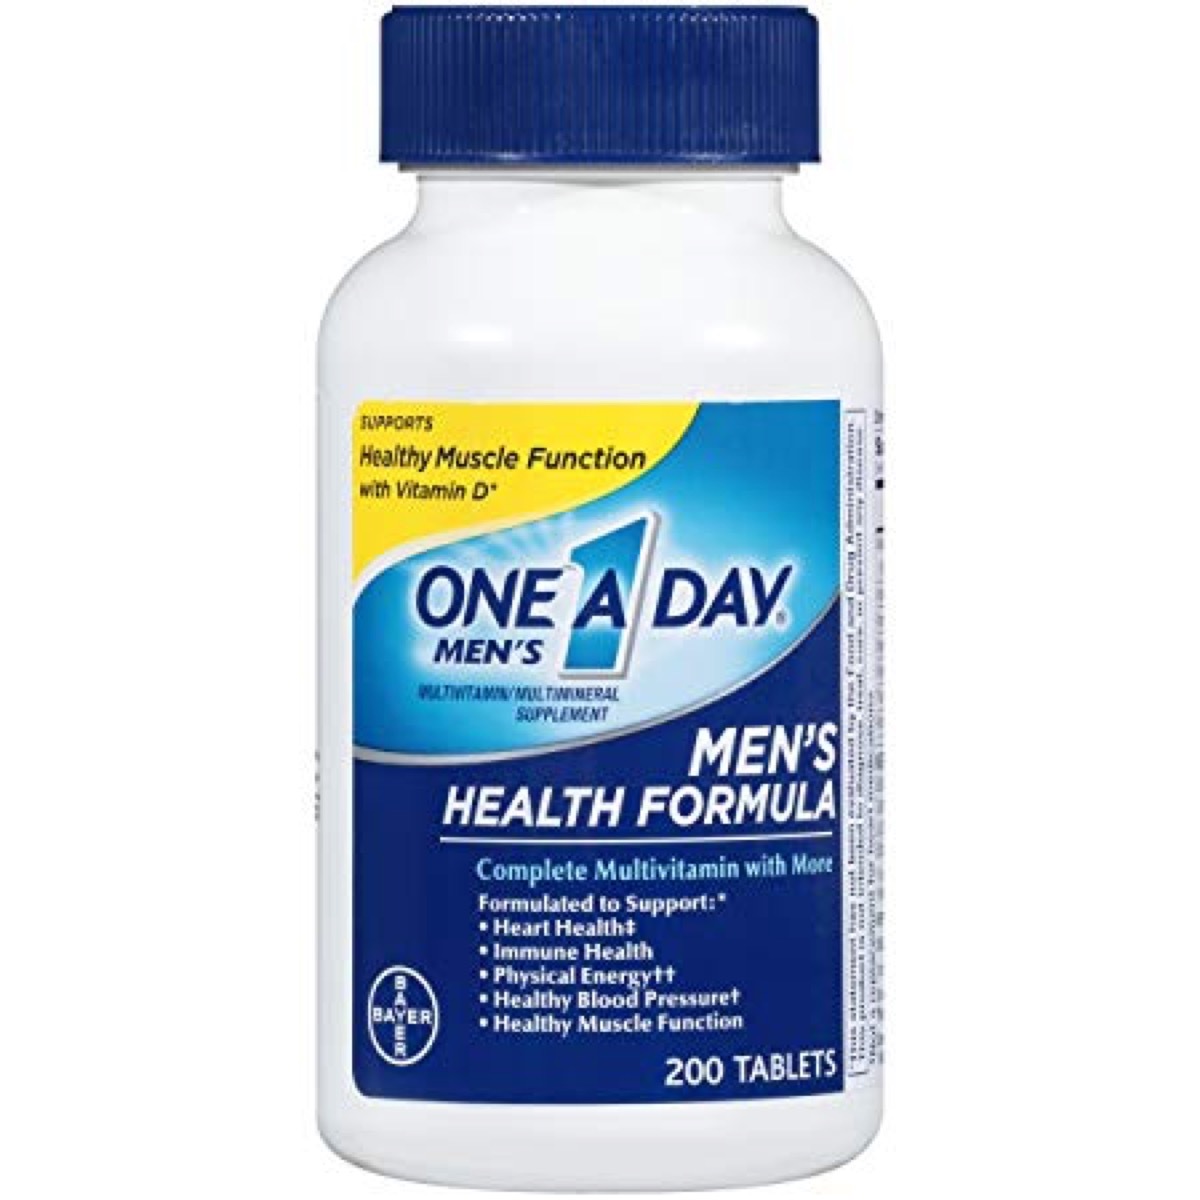 one a day, best multivitamin for men 